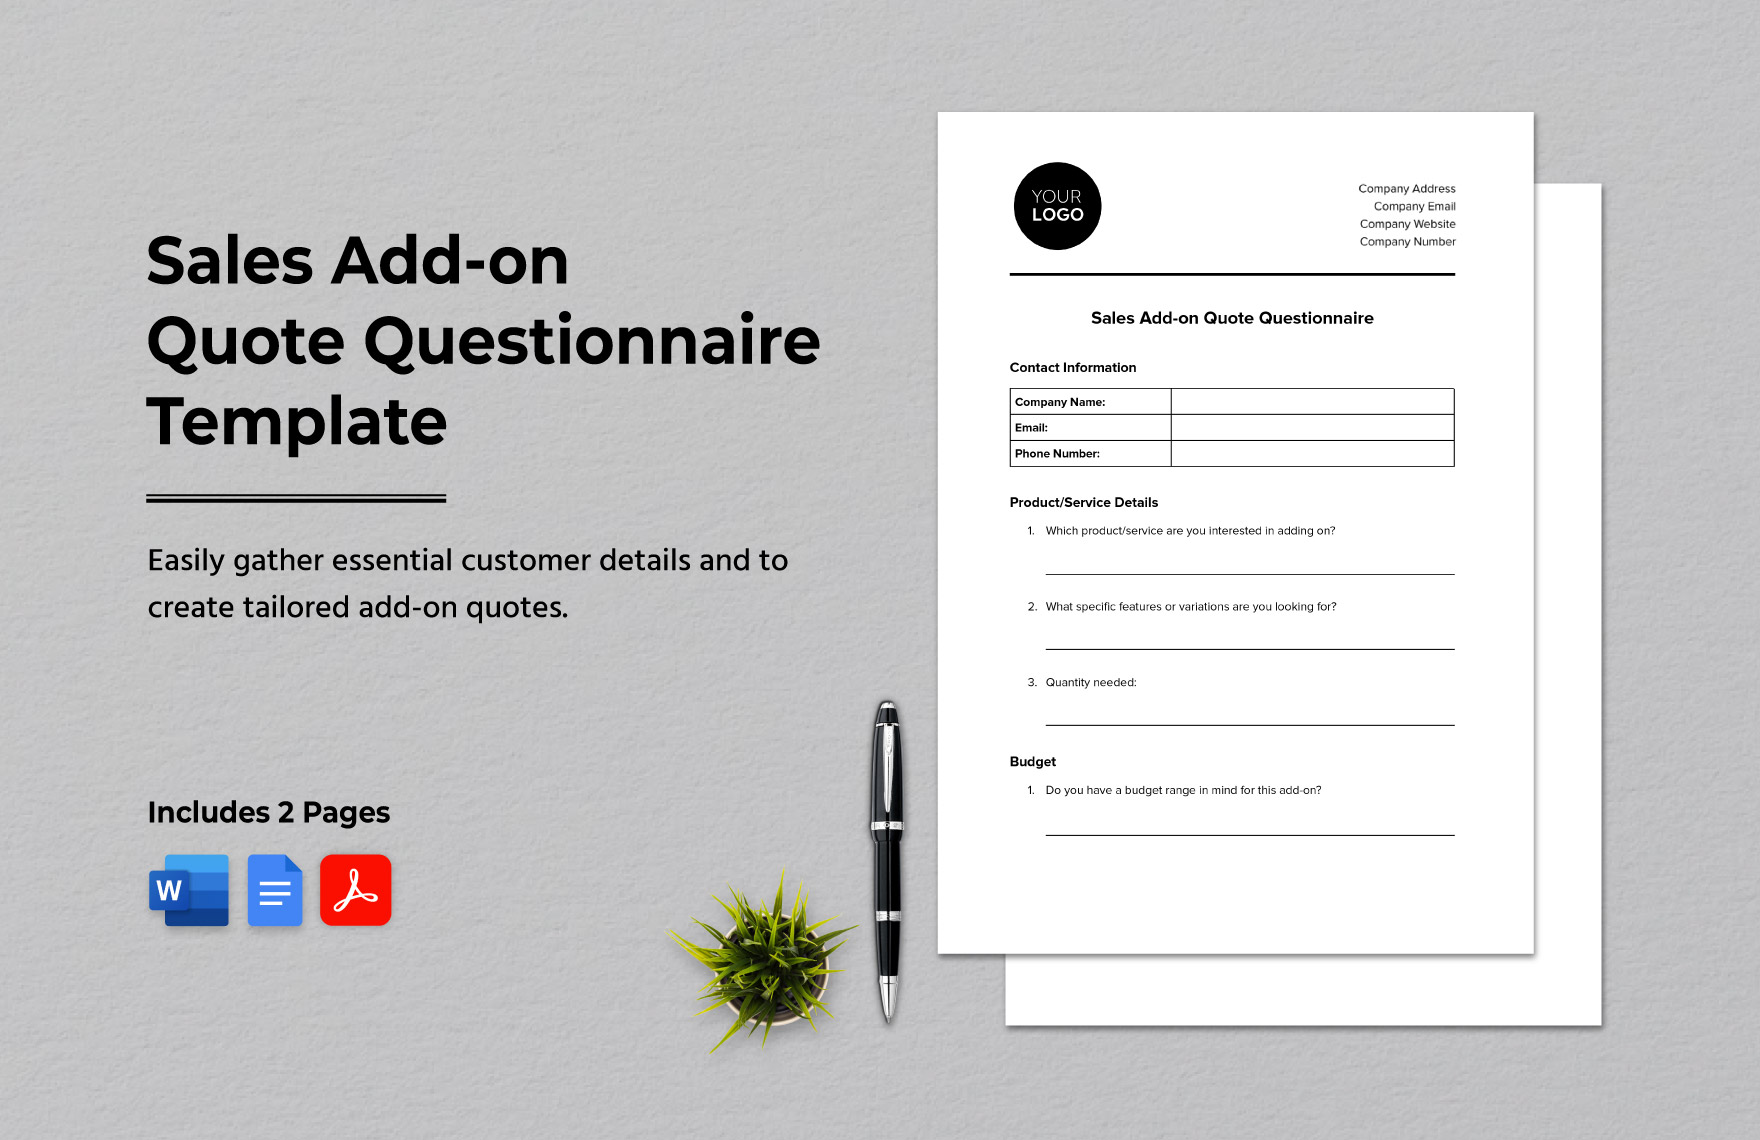 Sales Add-on Quote Questionnaire Template in Word, Google Docs, PDF